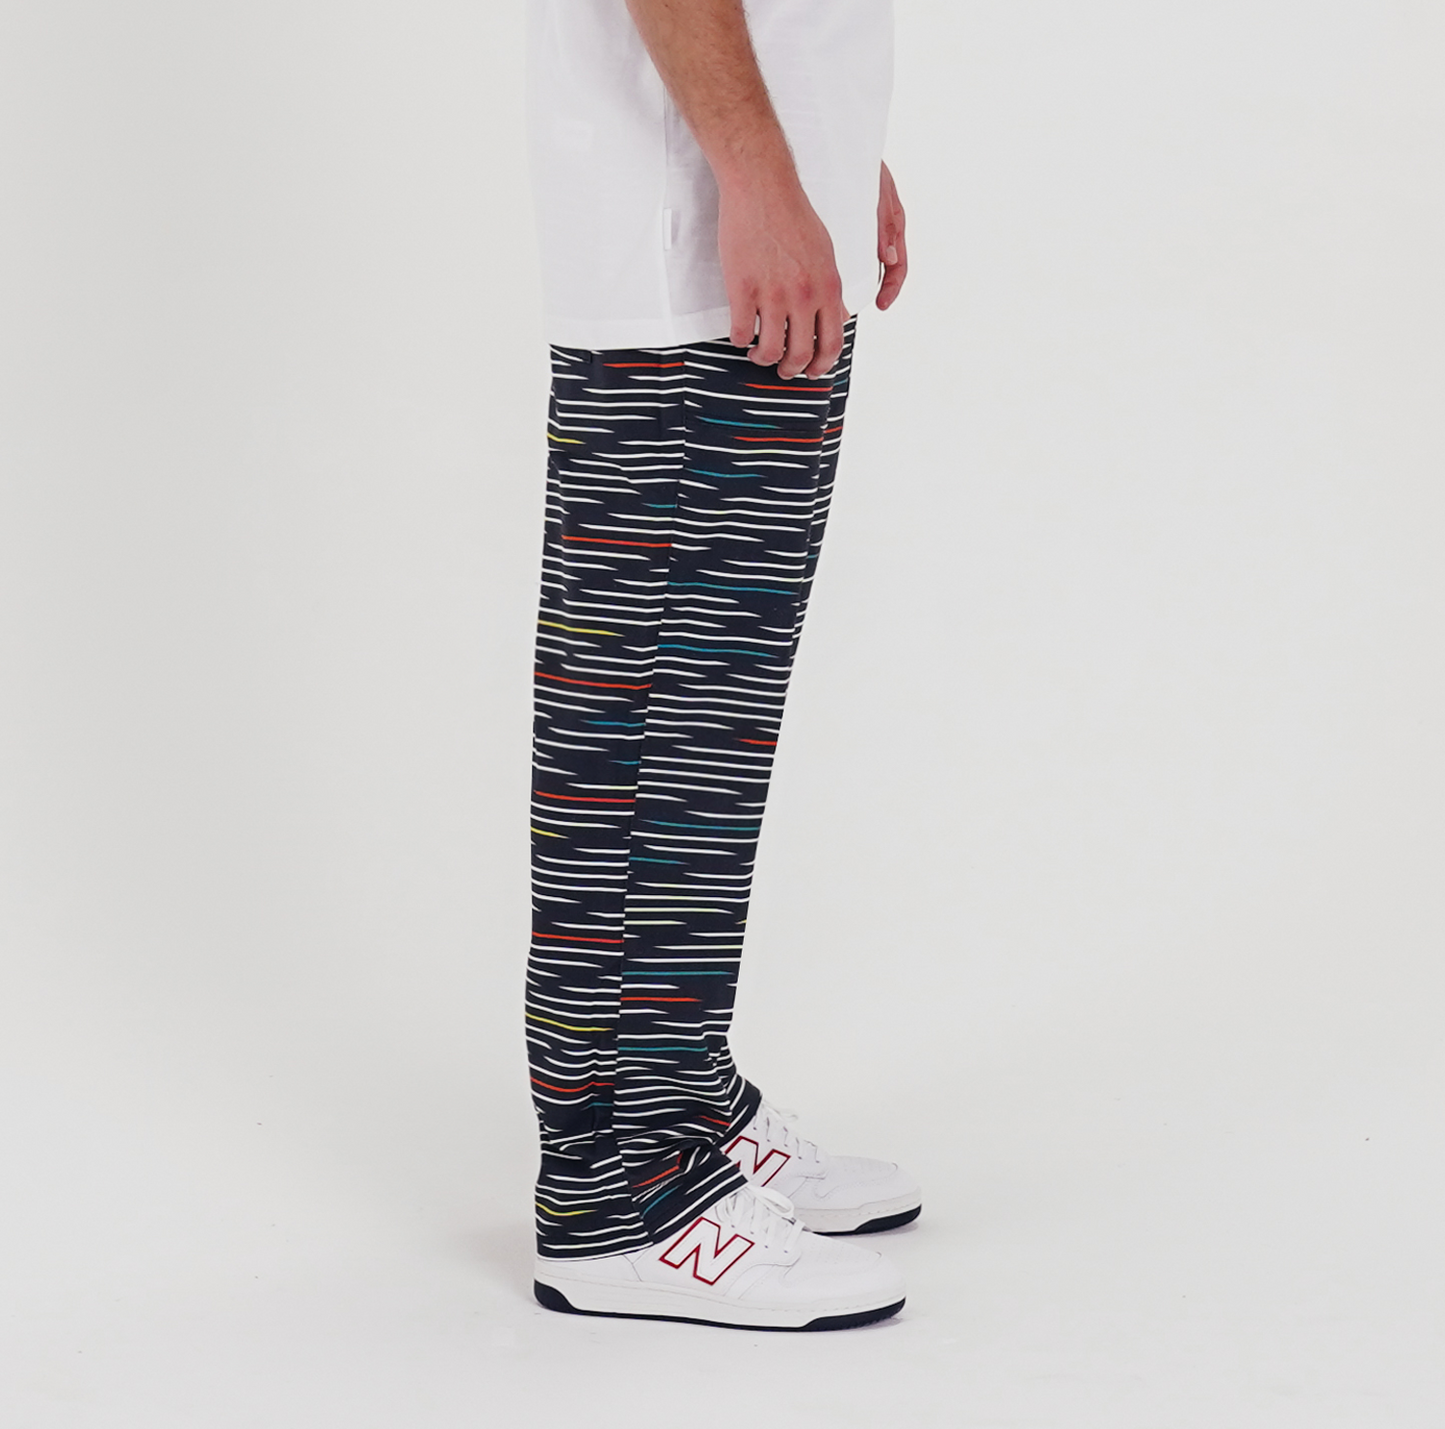 The Mens Surf Pant Printed Katouche Navy from Parlez clothing